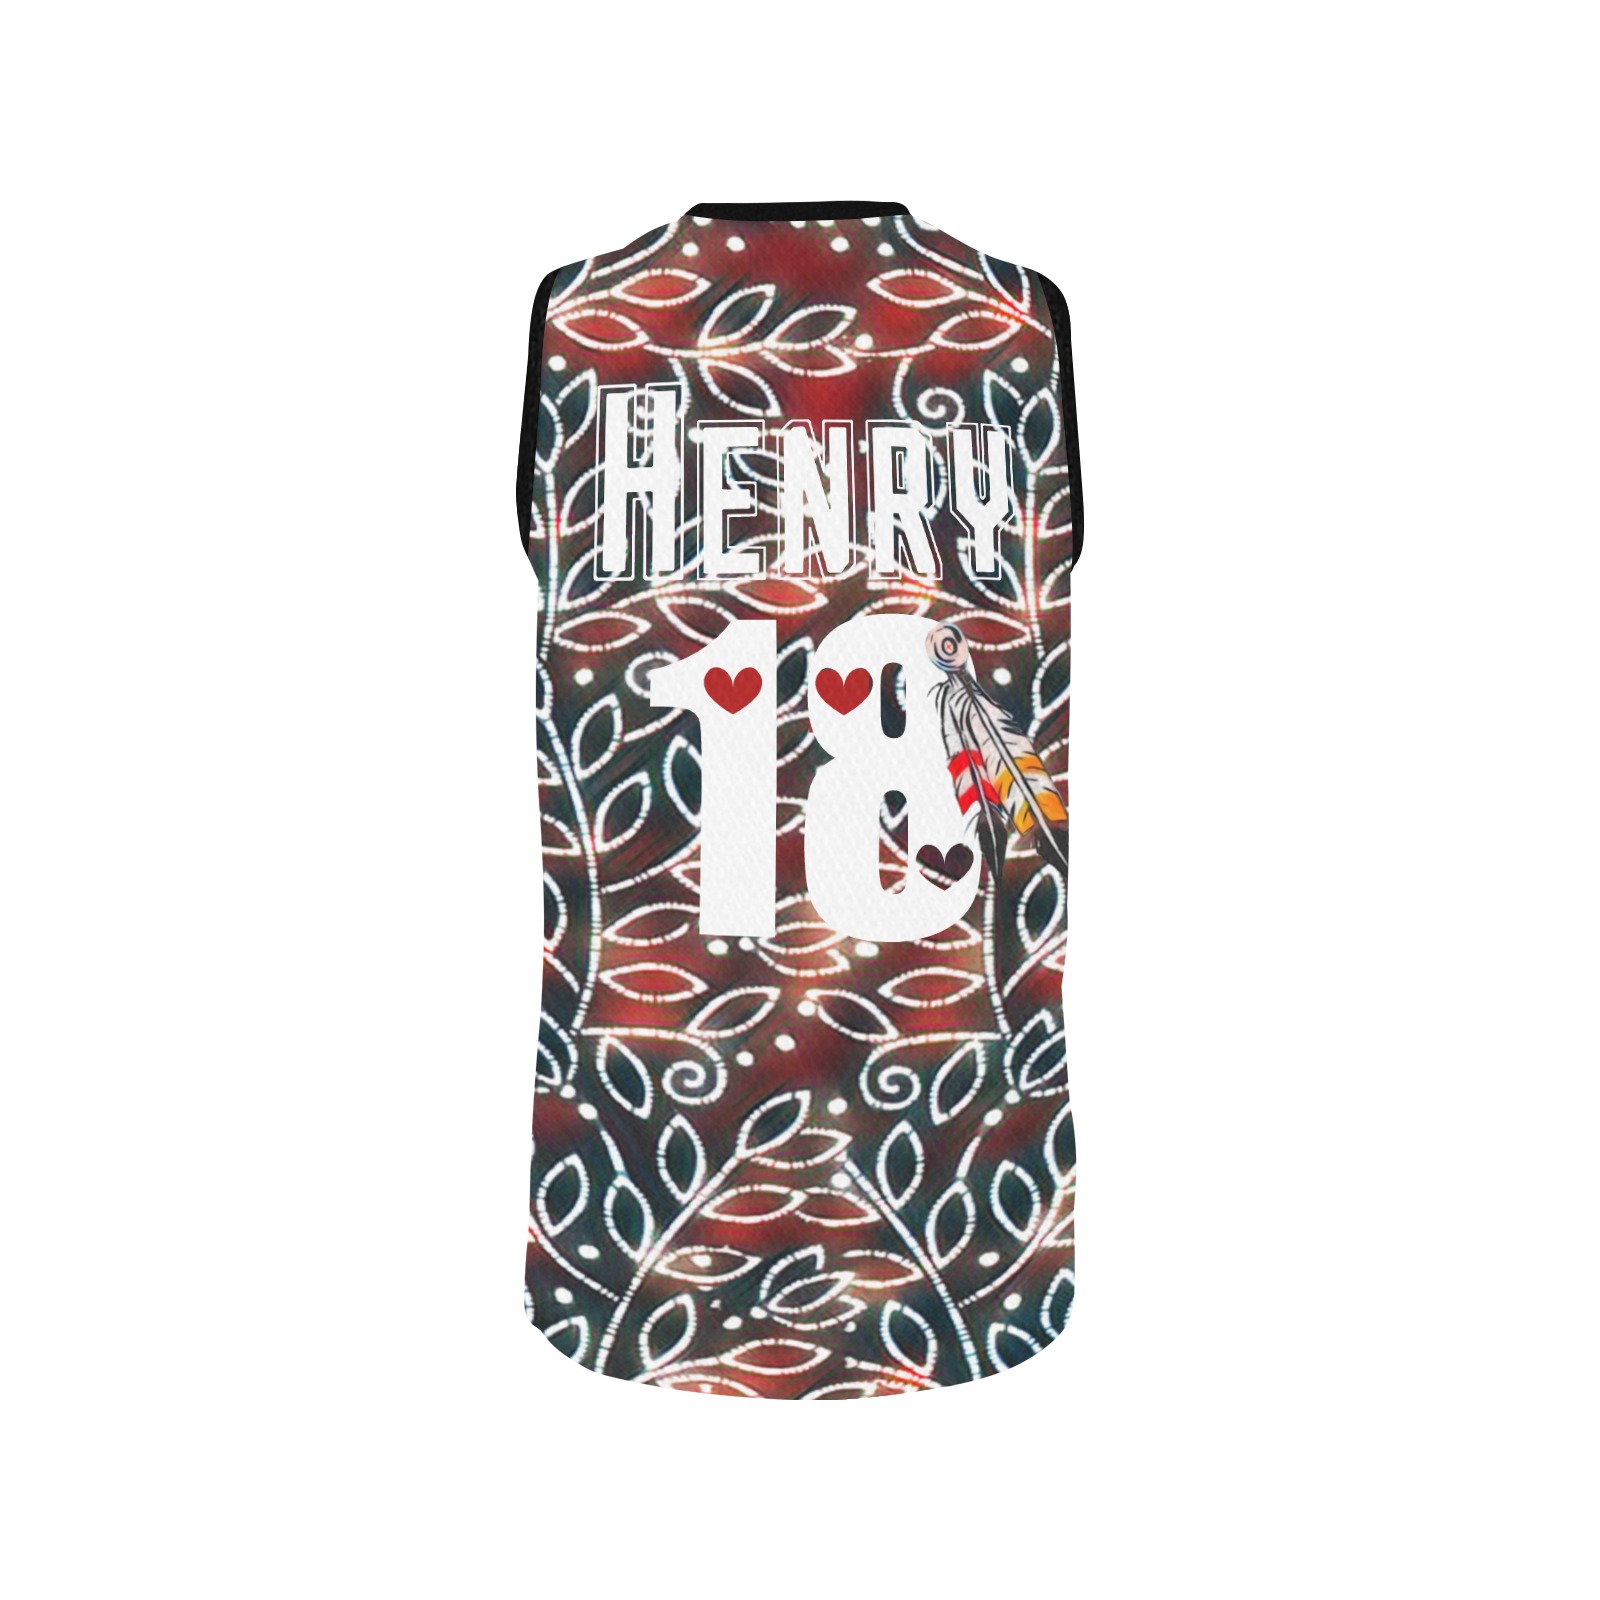 MMIW jersey henry18 All Over Print Basketball Jersey